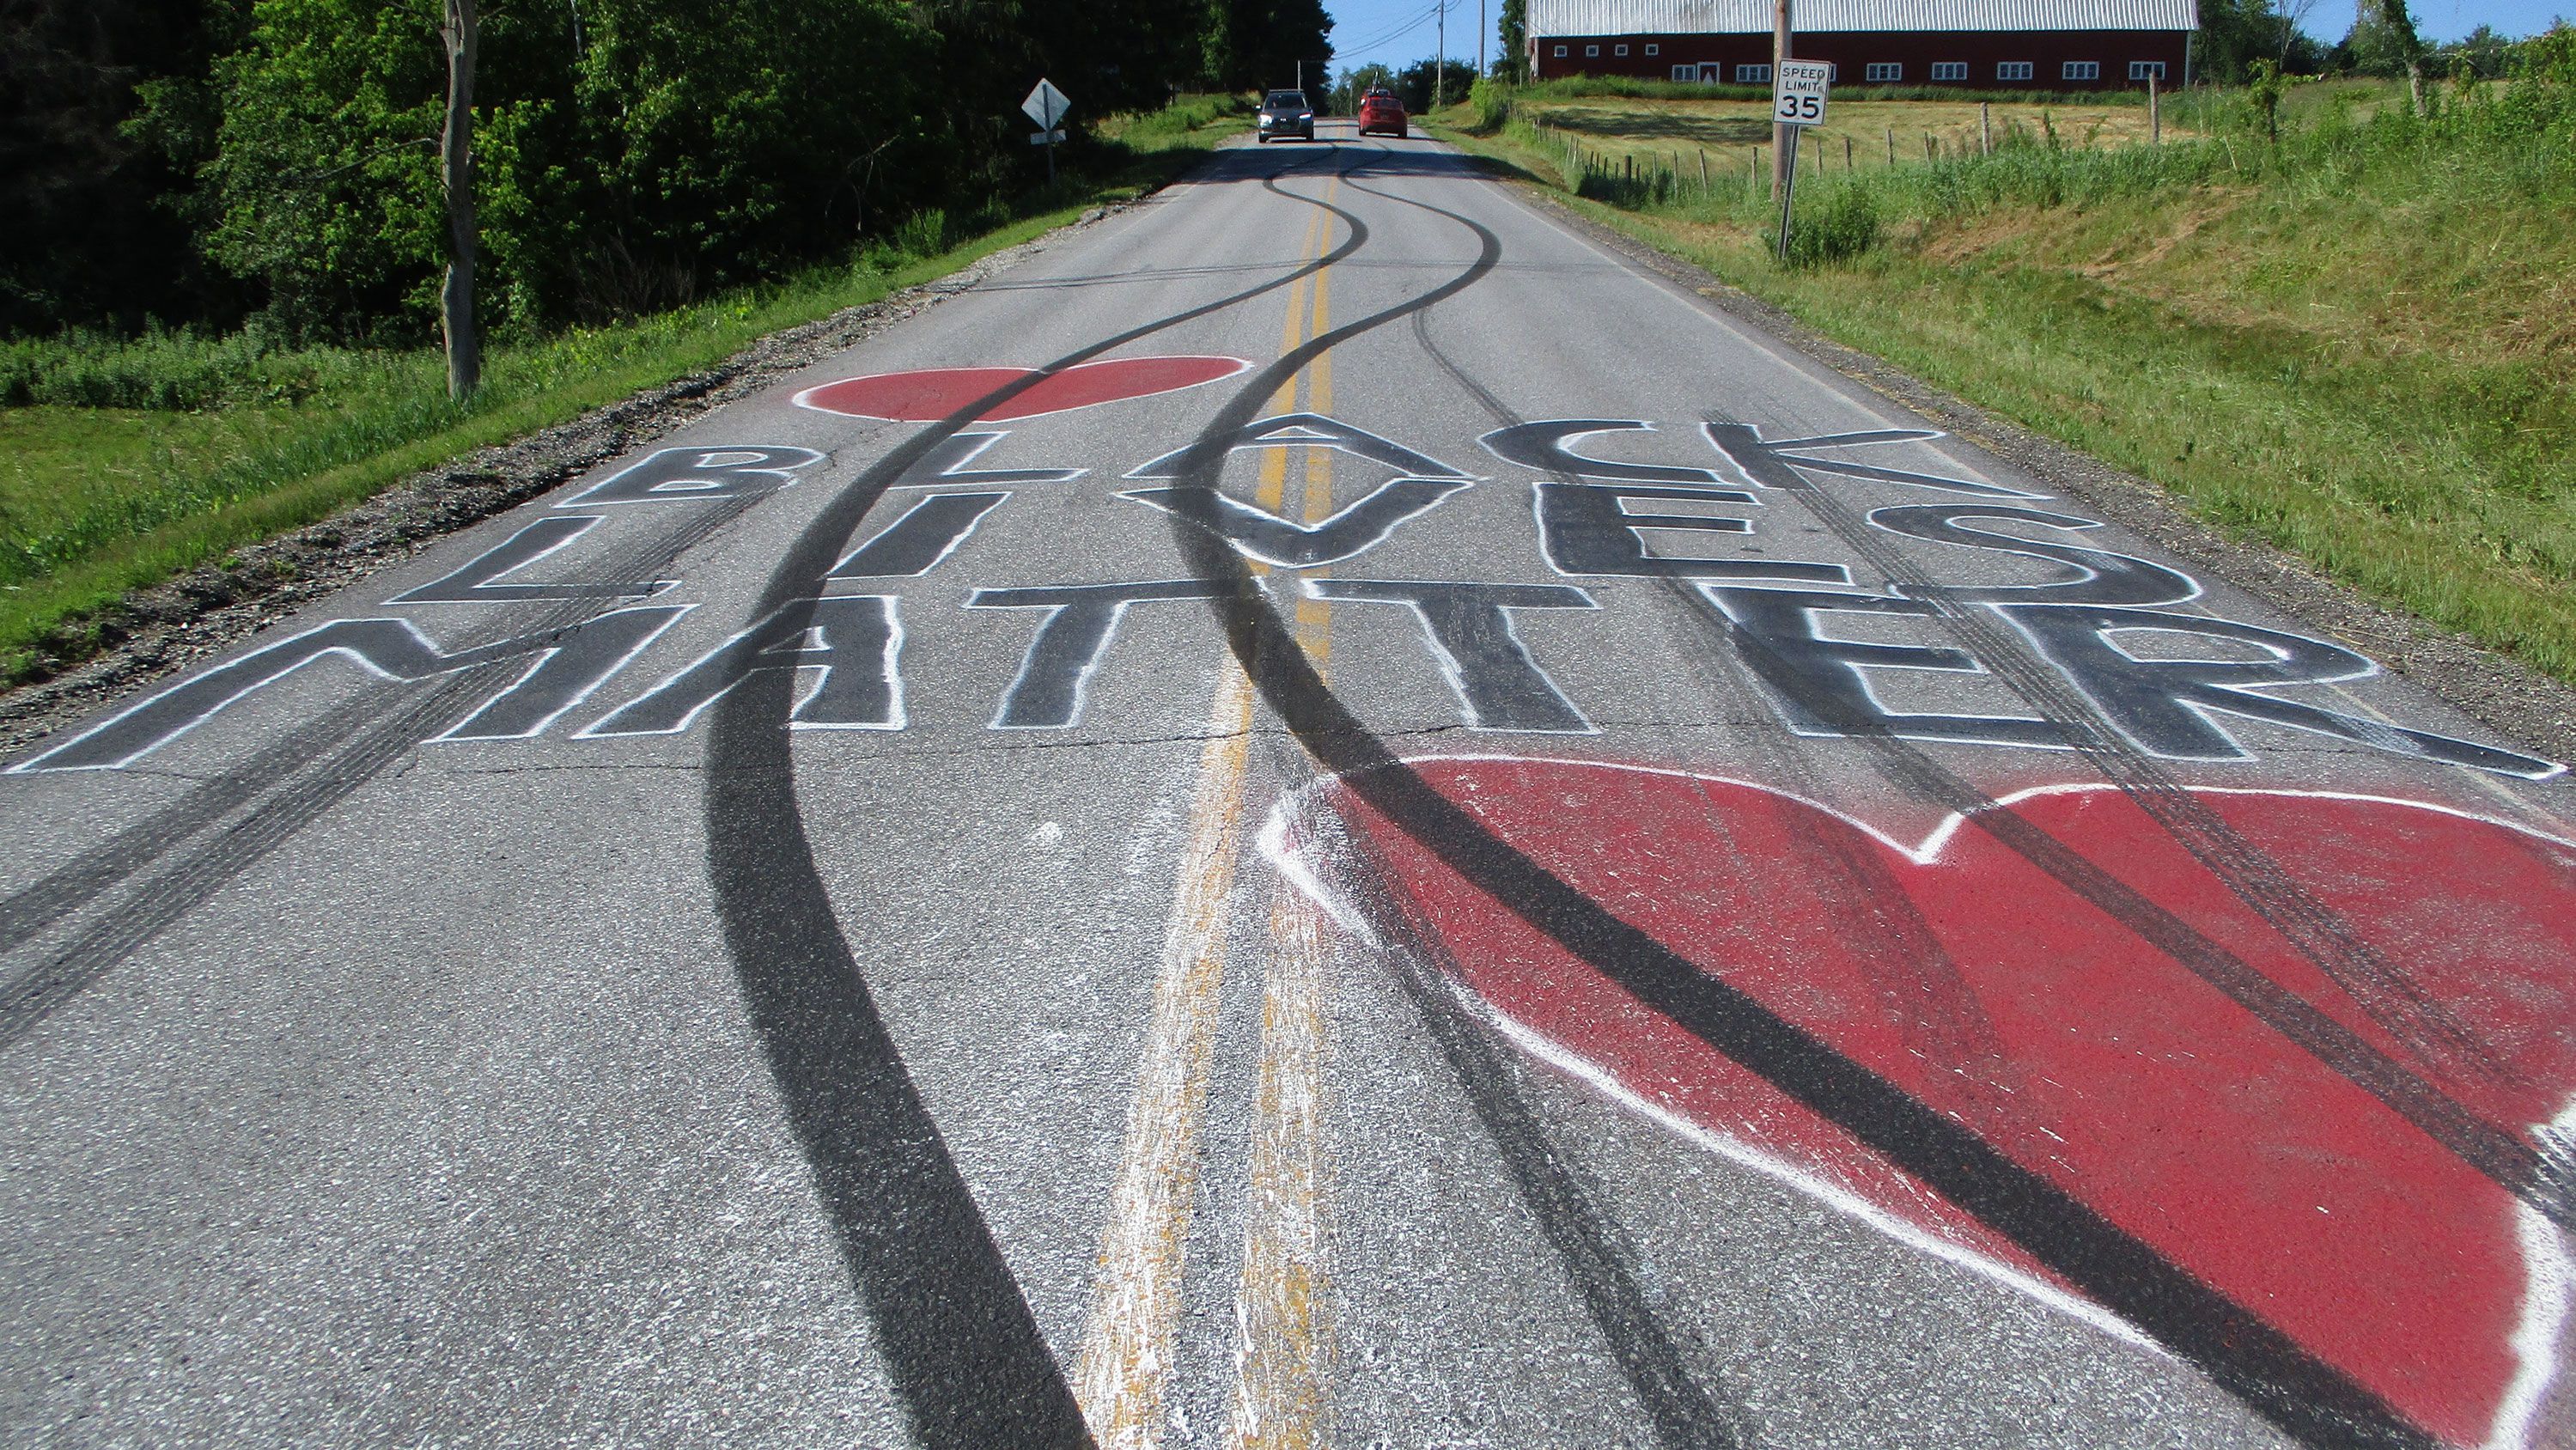 Three Black Lives Matter roadway murals in Vermont were defaced, according to state police.